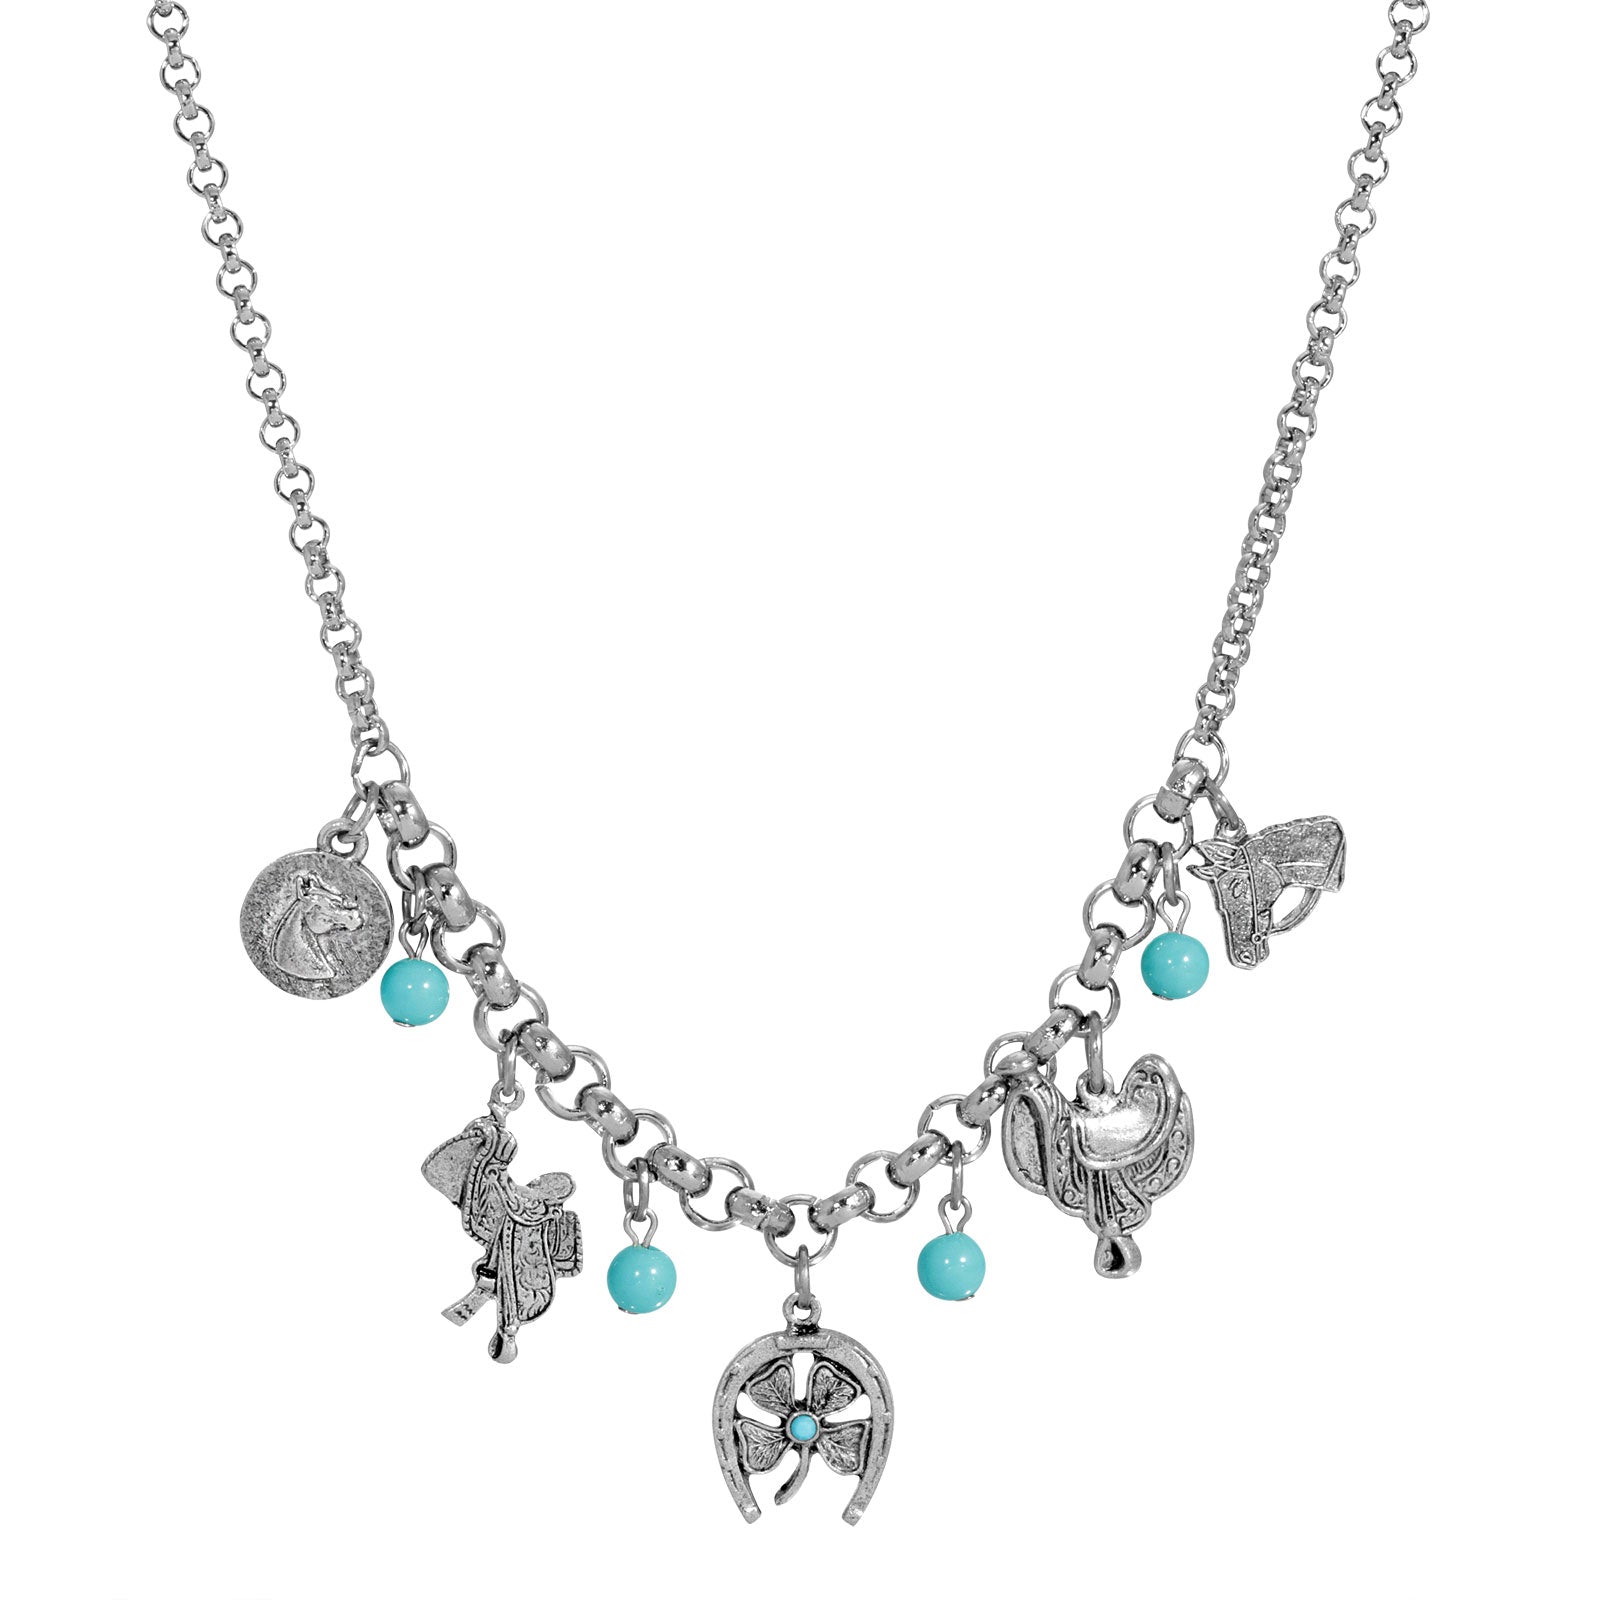 Pewter Turquoise Bead Horse Charm Necklace 16 Inch Adj